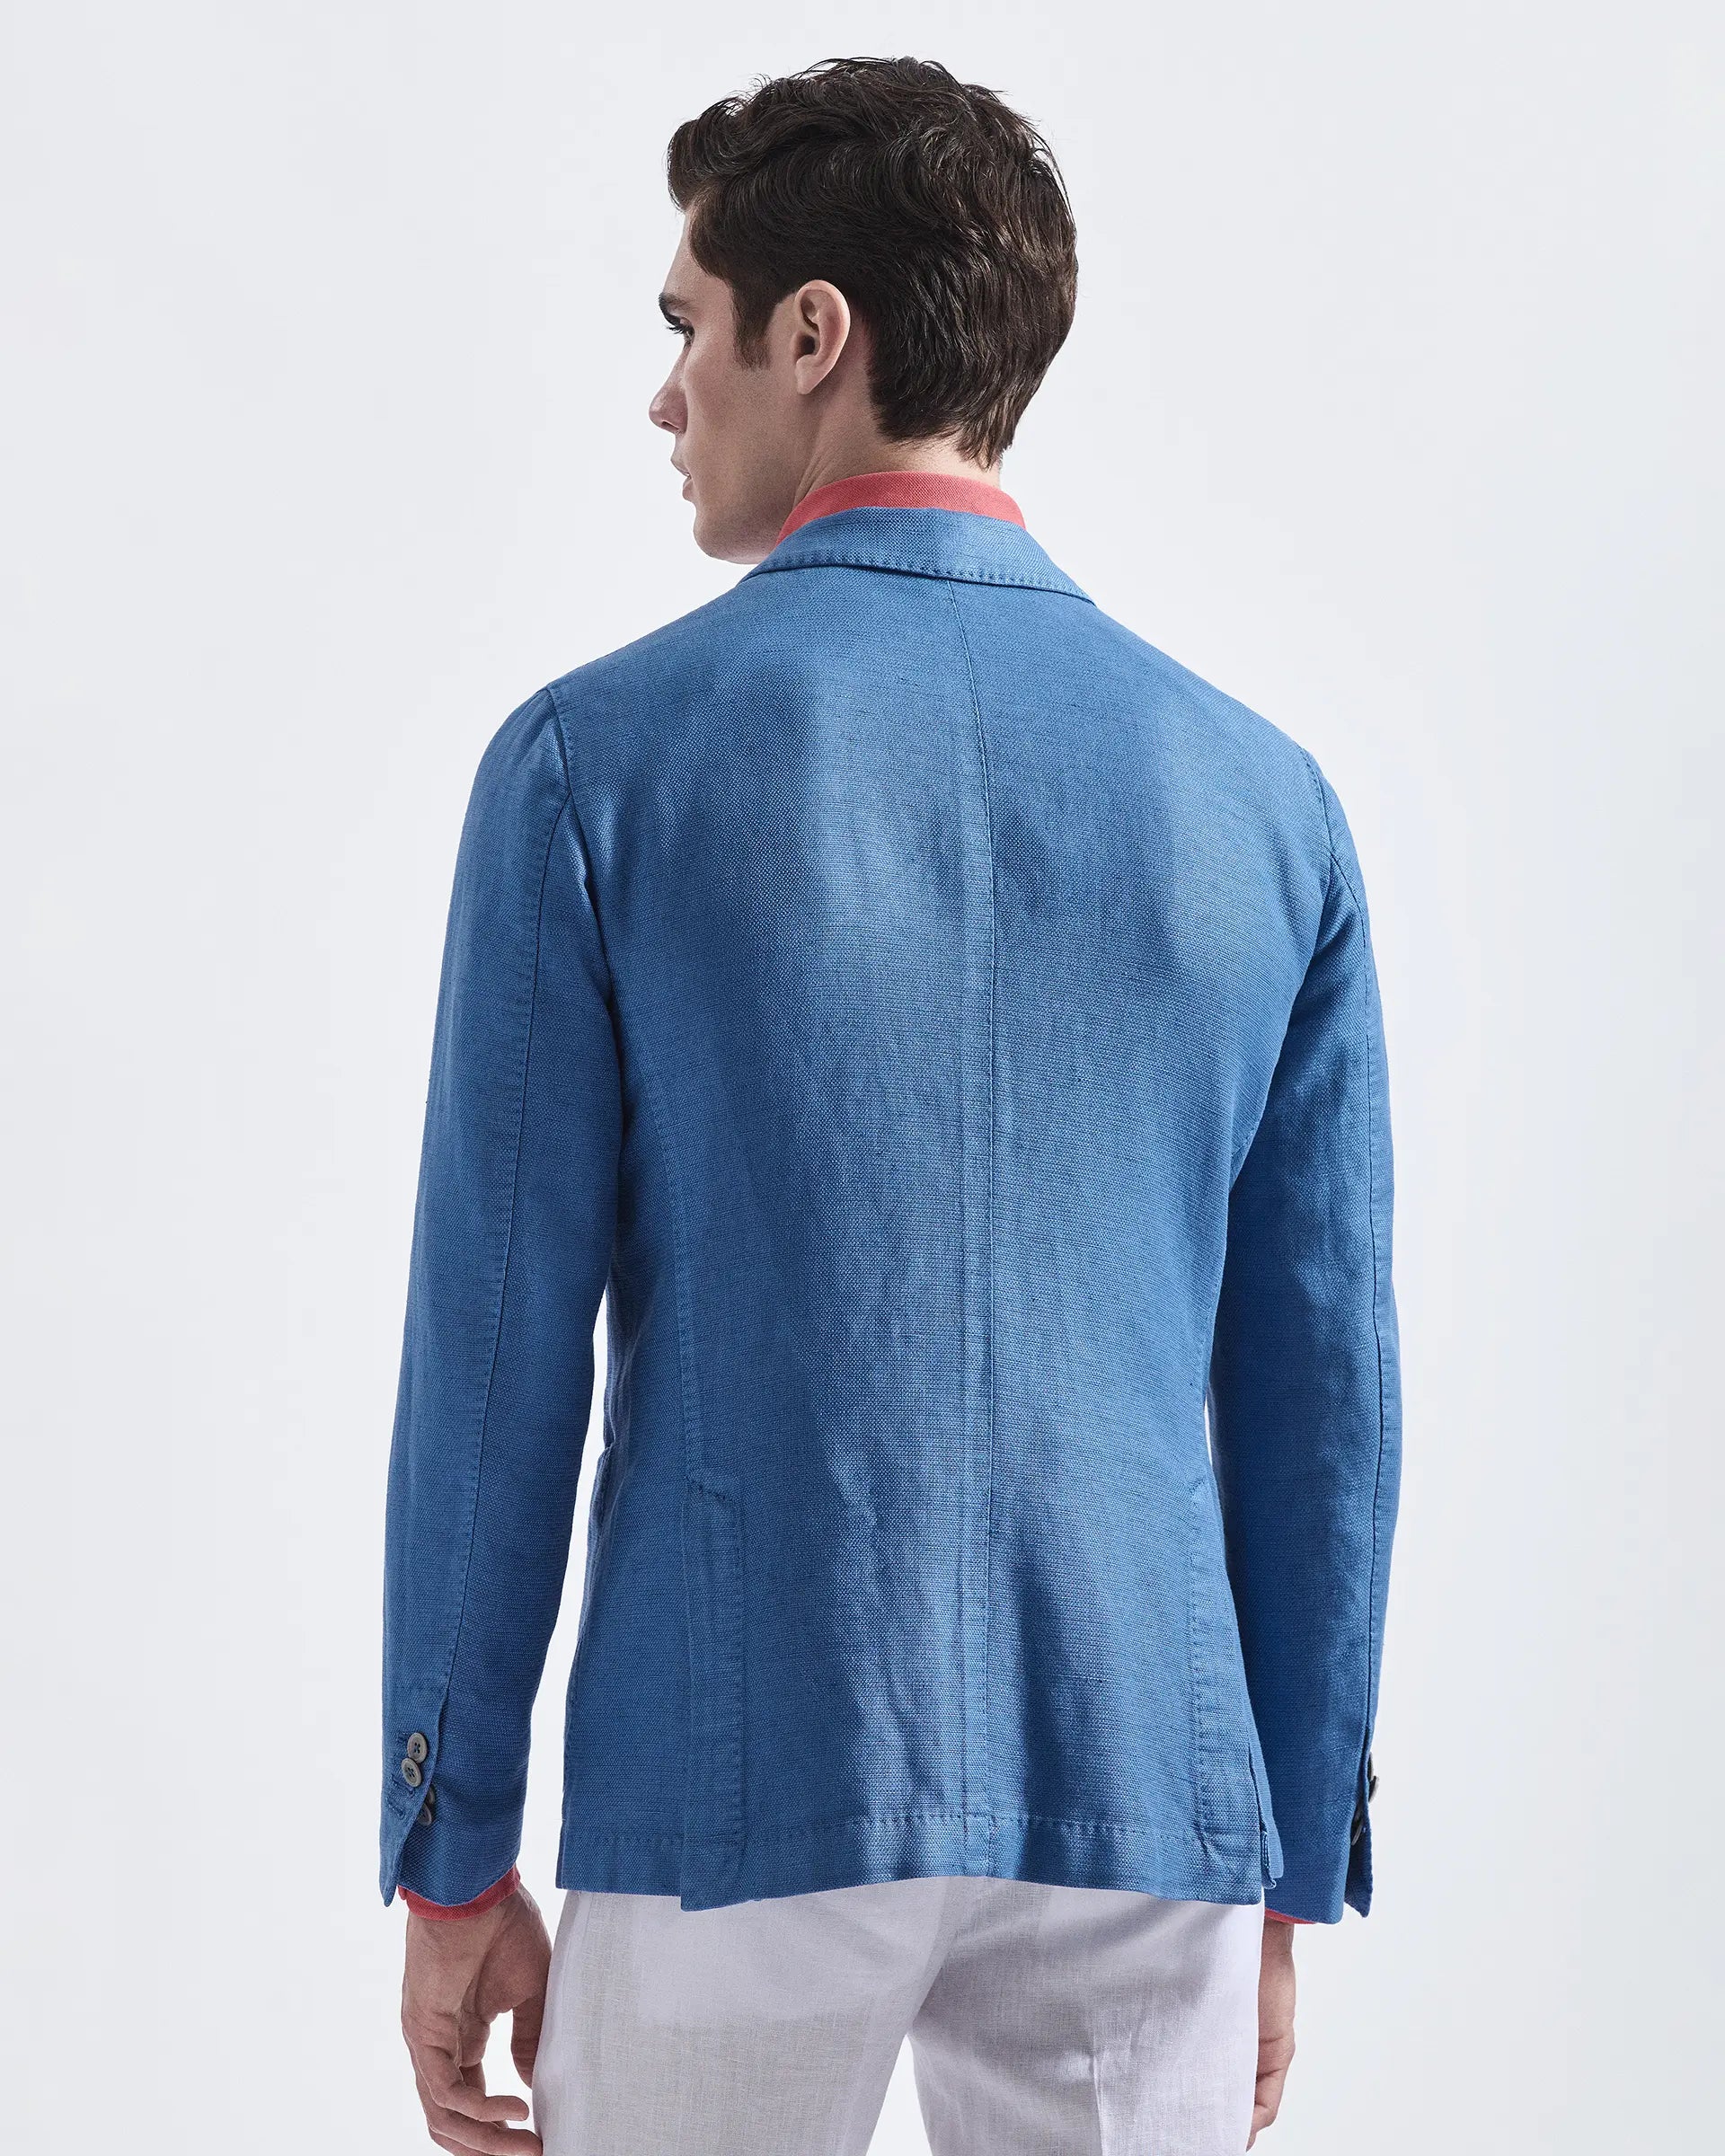 Garment-dyed cotton and linen jacket